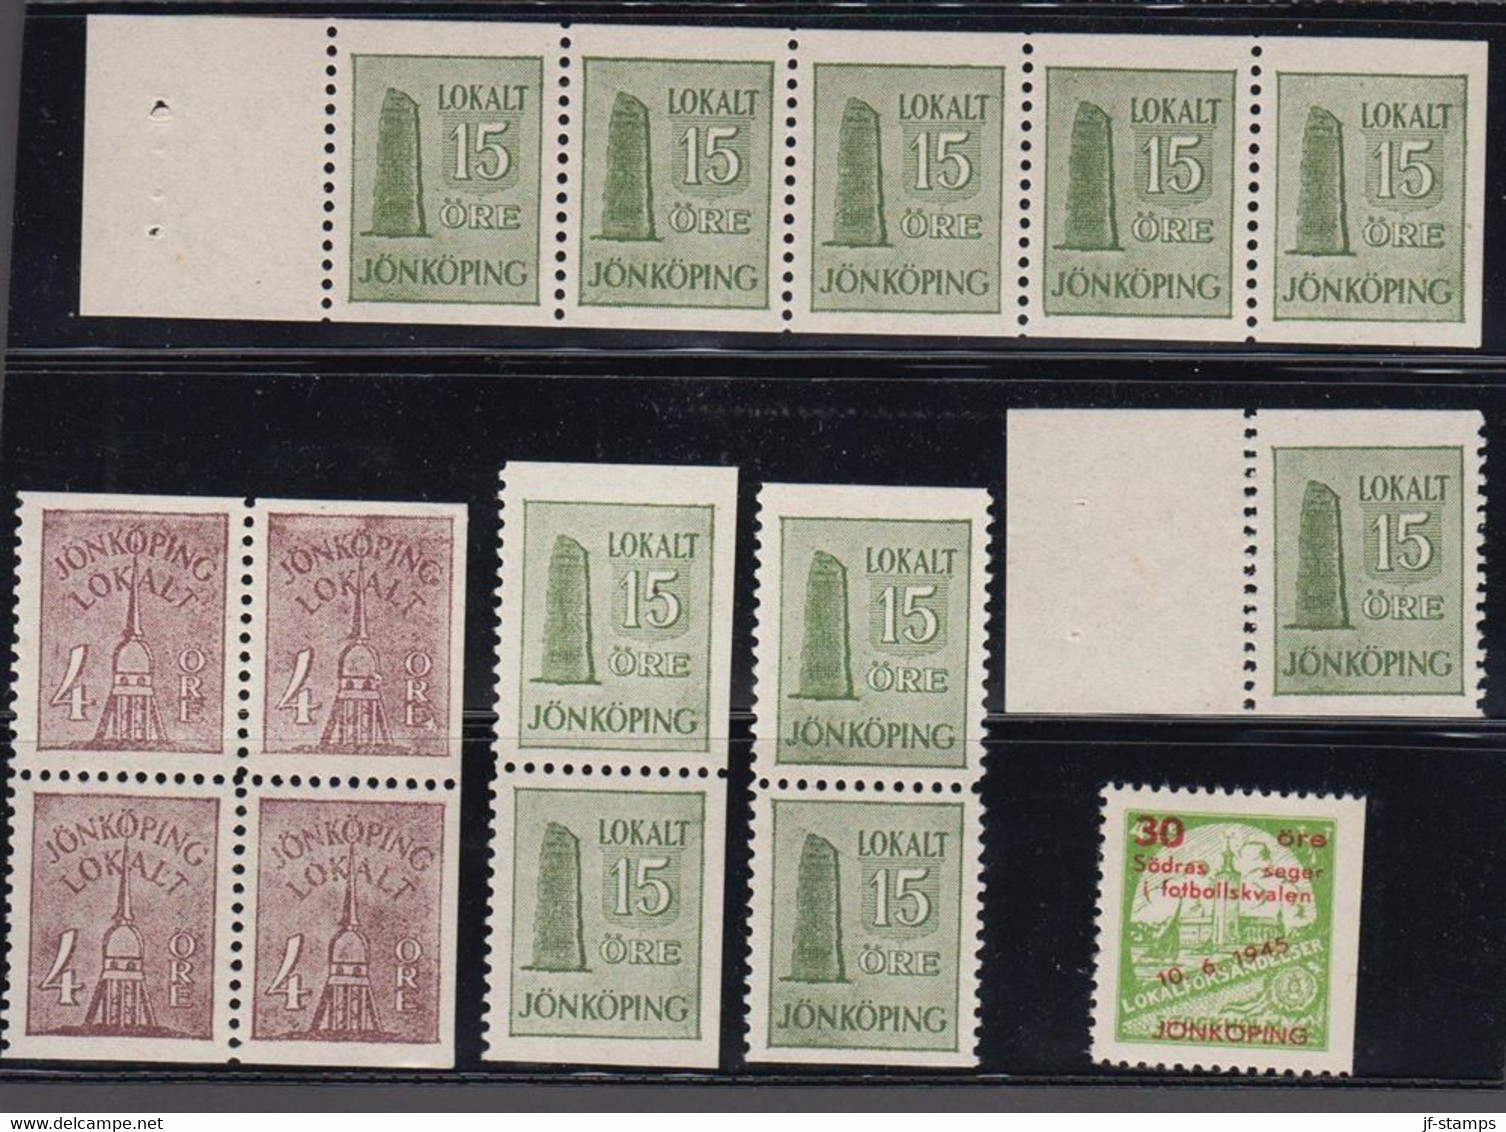 1945. SVERIGE. JÖNKÖPING LOKALT. Selection Of 15 Seals Both Hinged And Never Hinged. Including The Overpri... - JF520096 - Emissions Locales